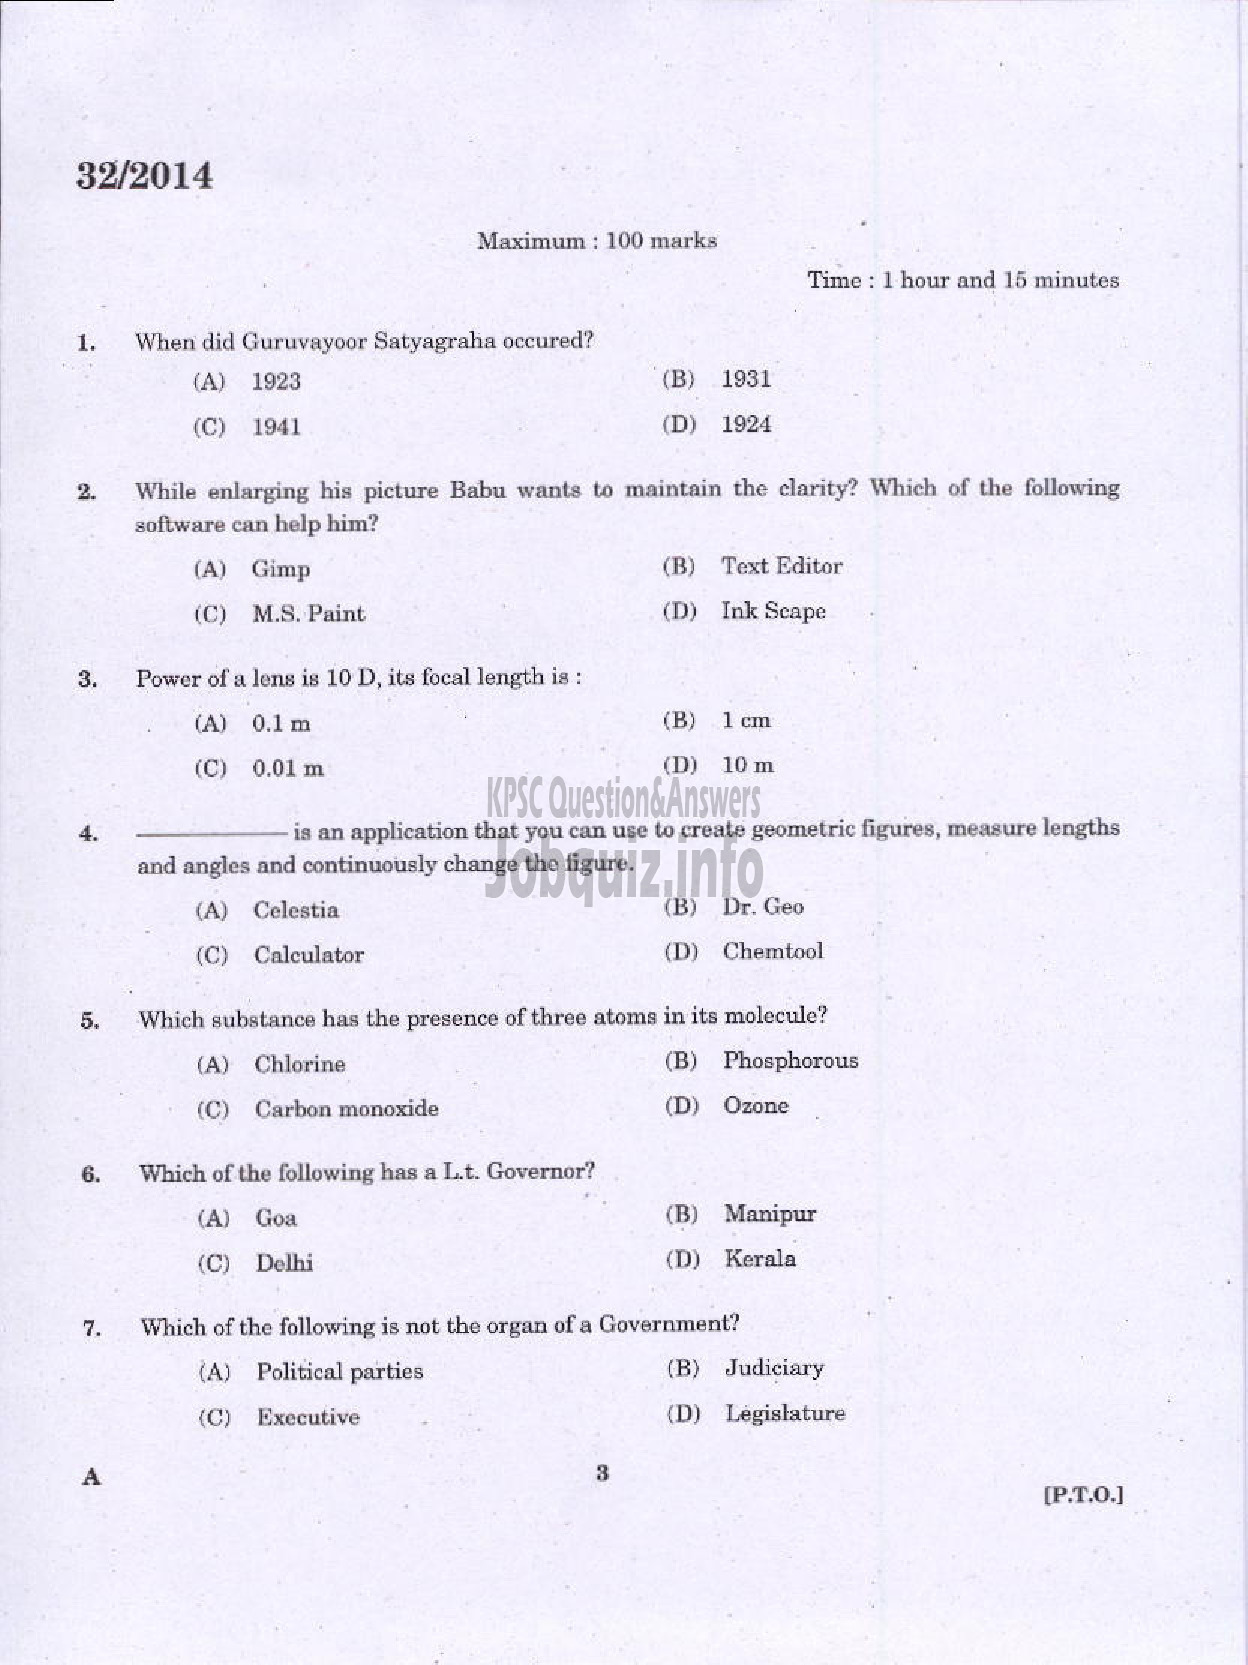 Kerala PSC Question Paper - LOWER DIVISION TYPIST NCA VARIOUS GOVERNMENT OWNED COMPANIES IDUKKY-1